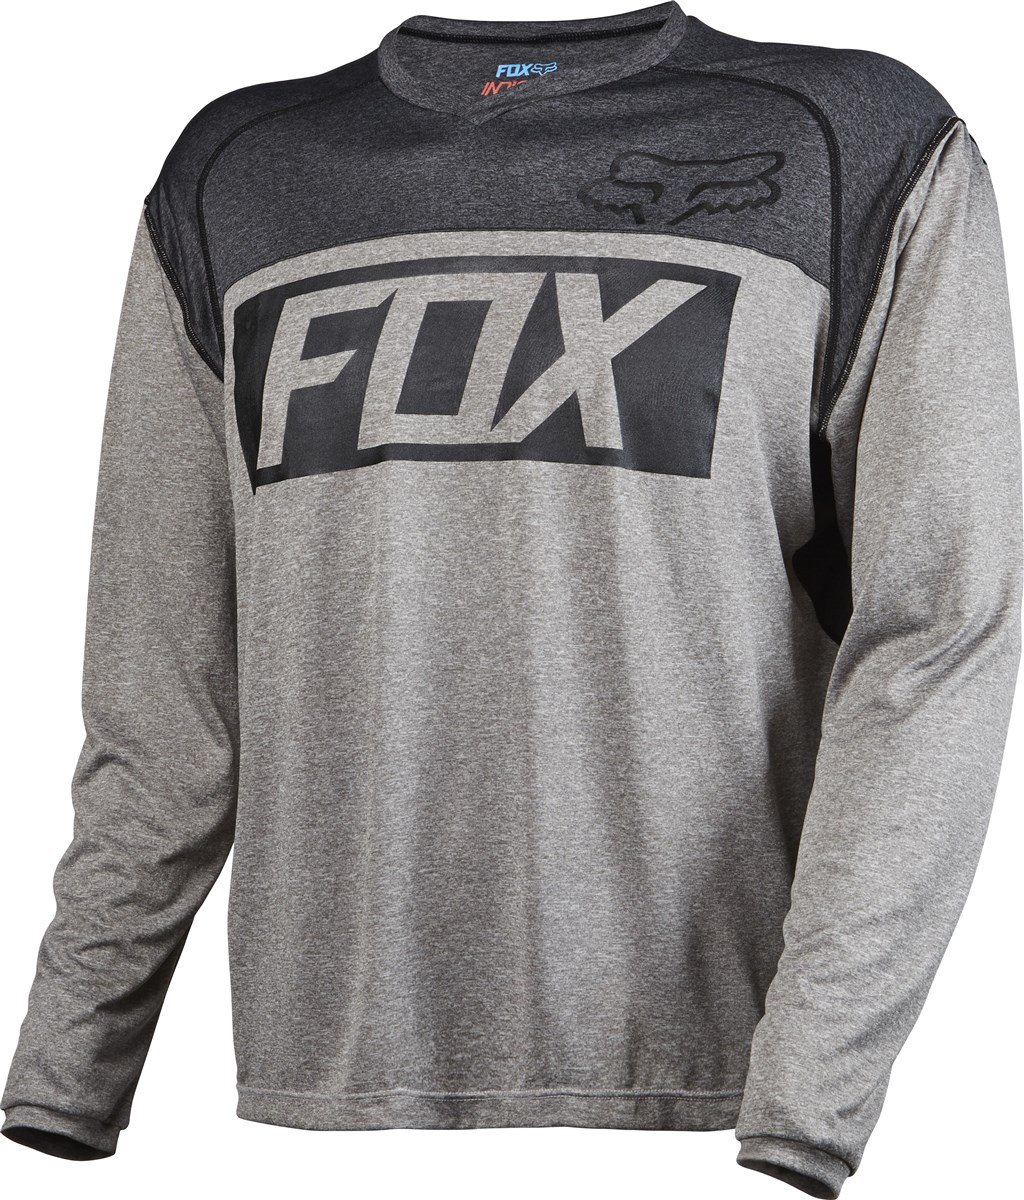 Fox Clothing Indicator Long Sleeve Cycling Jersey AW16 product image